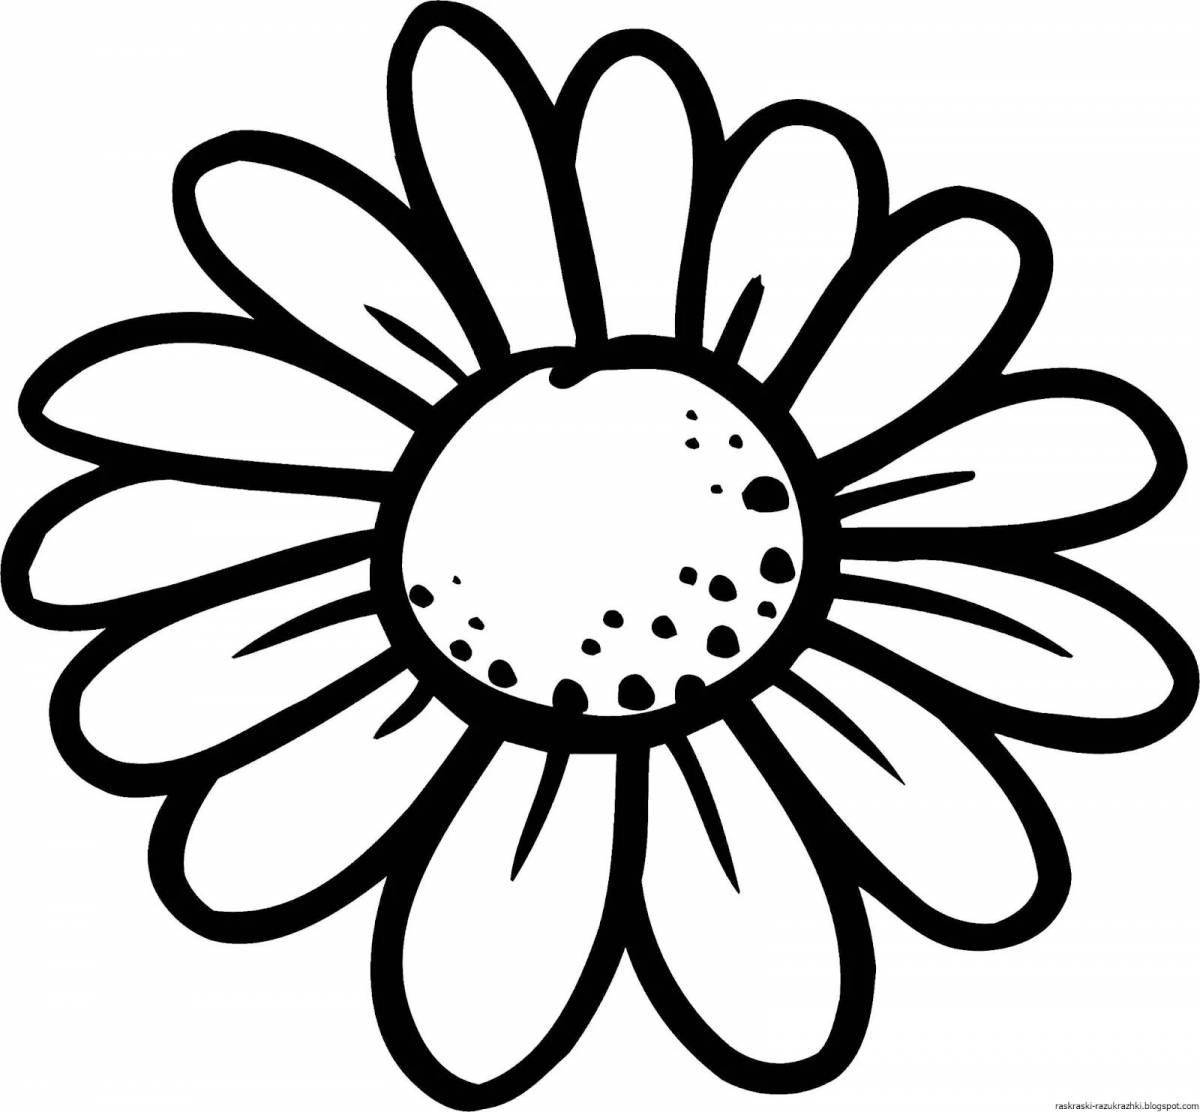 Big flower coloring page